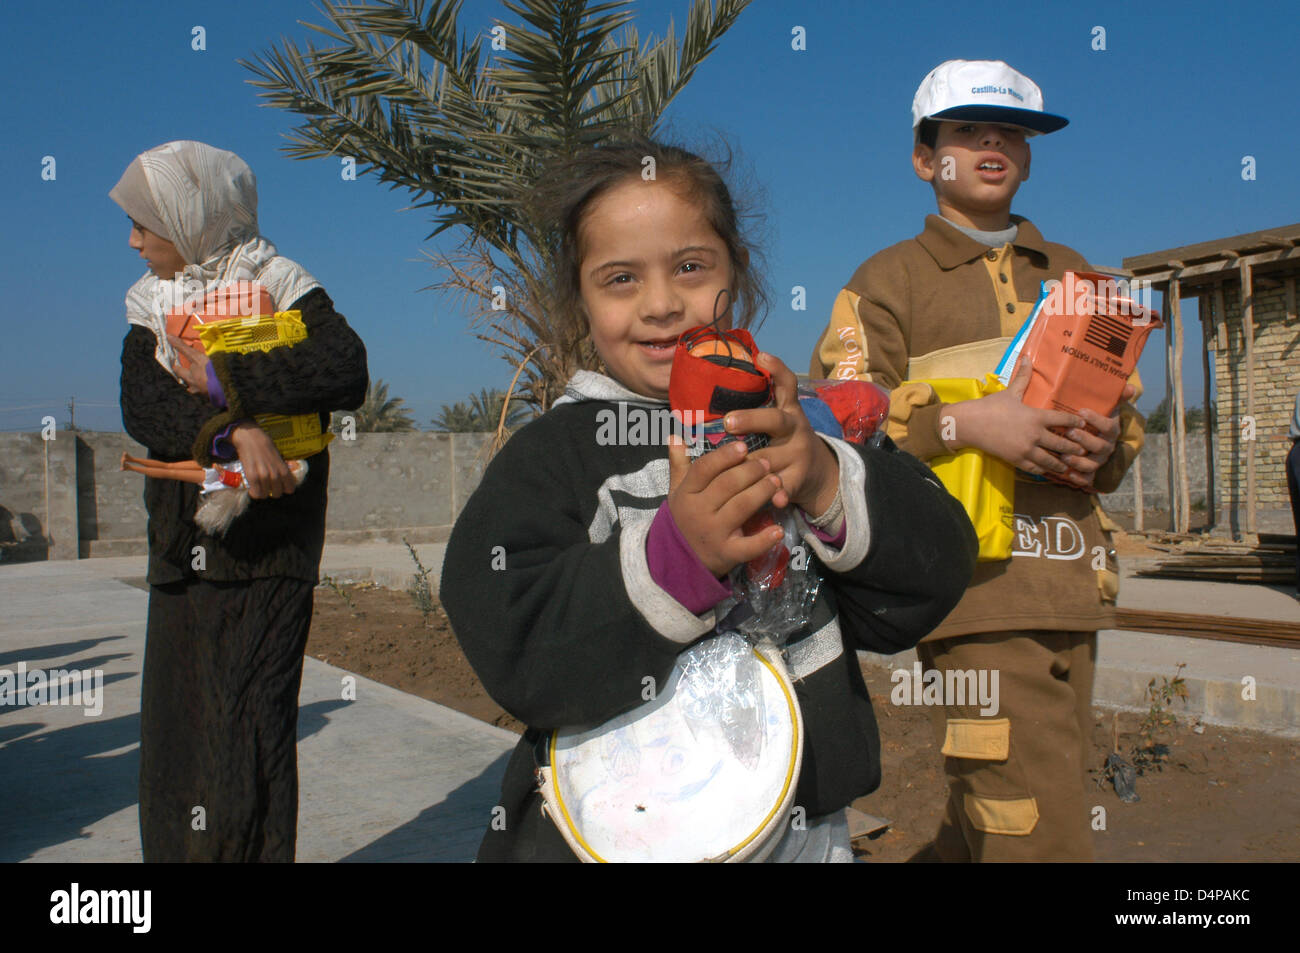 They get several boxes of humanitarian aid. While mothers are distributed warm clothes, children play around. Any clothing is welcome, although bearing the emblem of the people who murdered their family and friends. Stock Photo